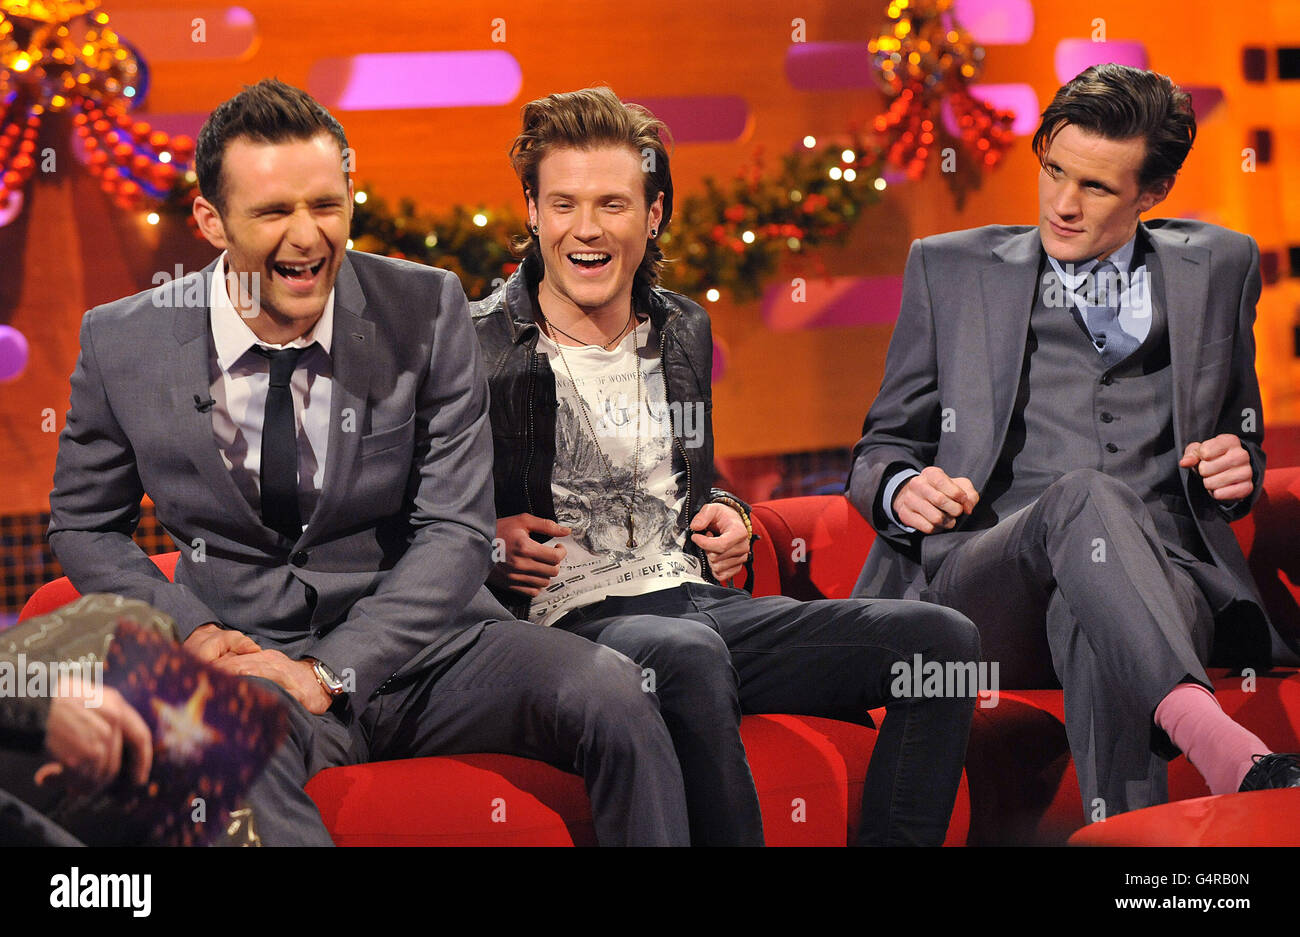 (left to right) Harry Judd, Dougie Poynter and Matt Smith, during filming of The Graham Norton Show, at The London Studios, south London, to be aired on BBC One on Friday evening. Stock Photo